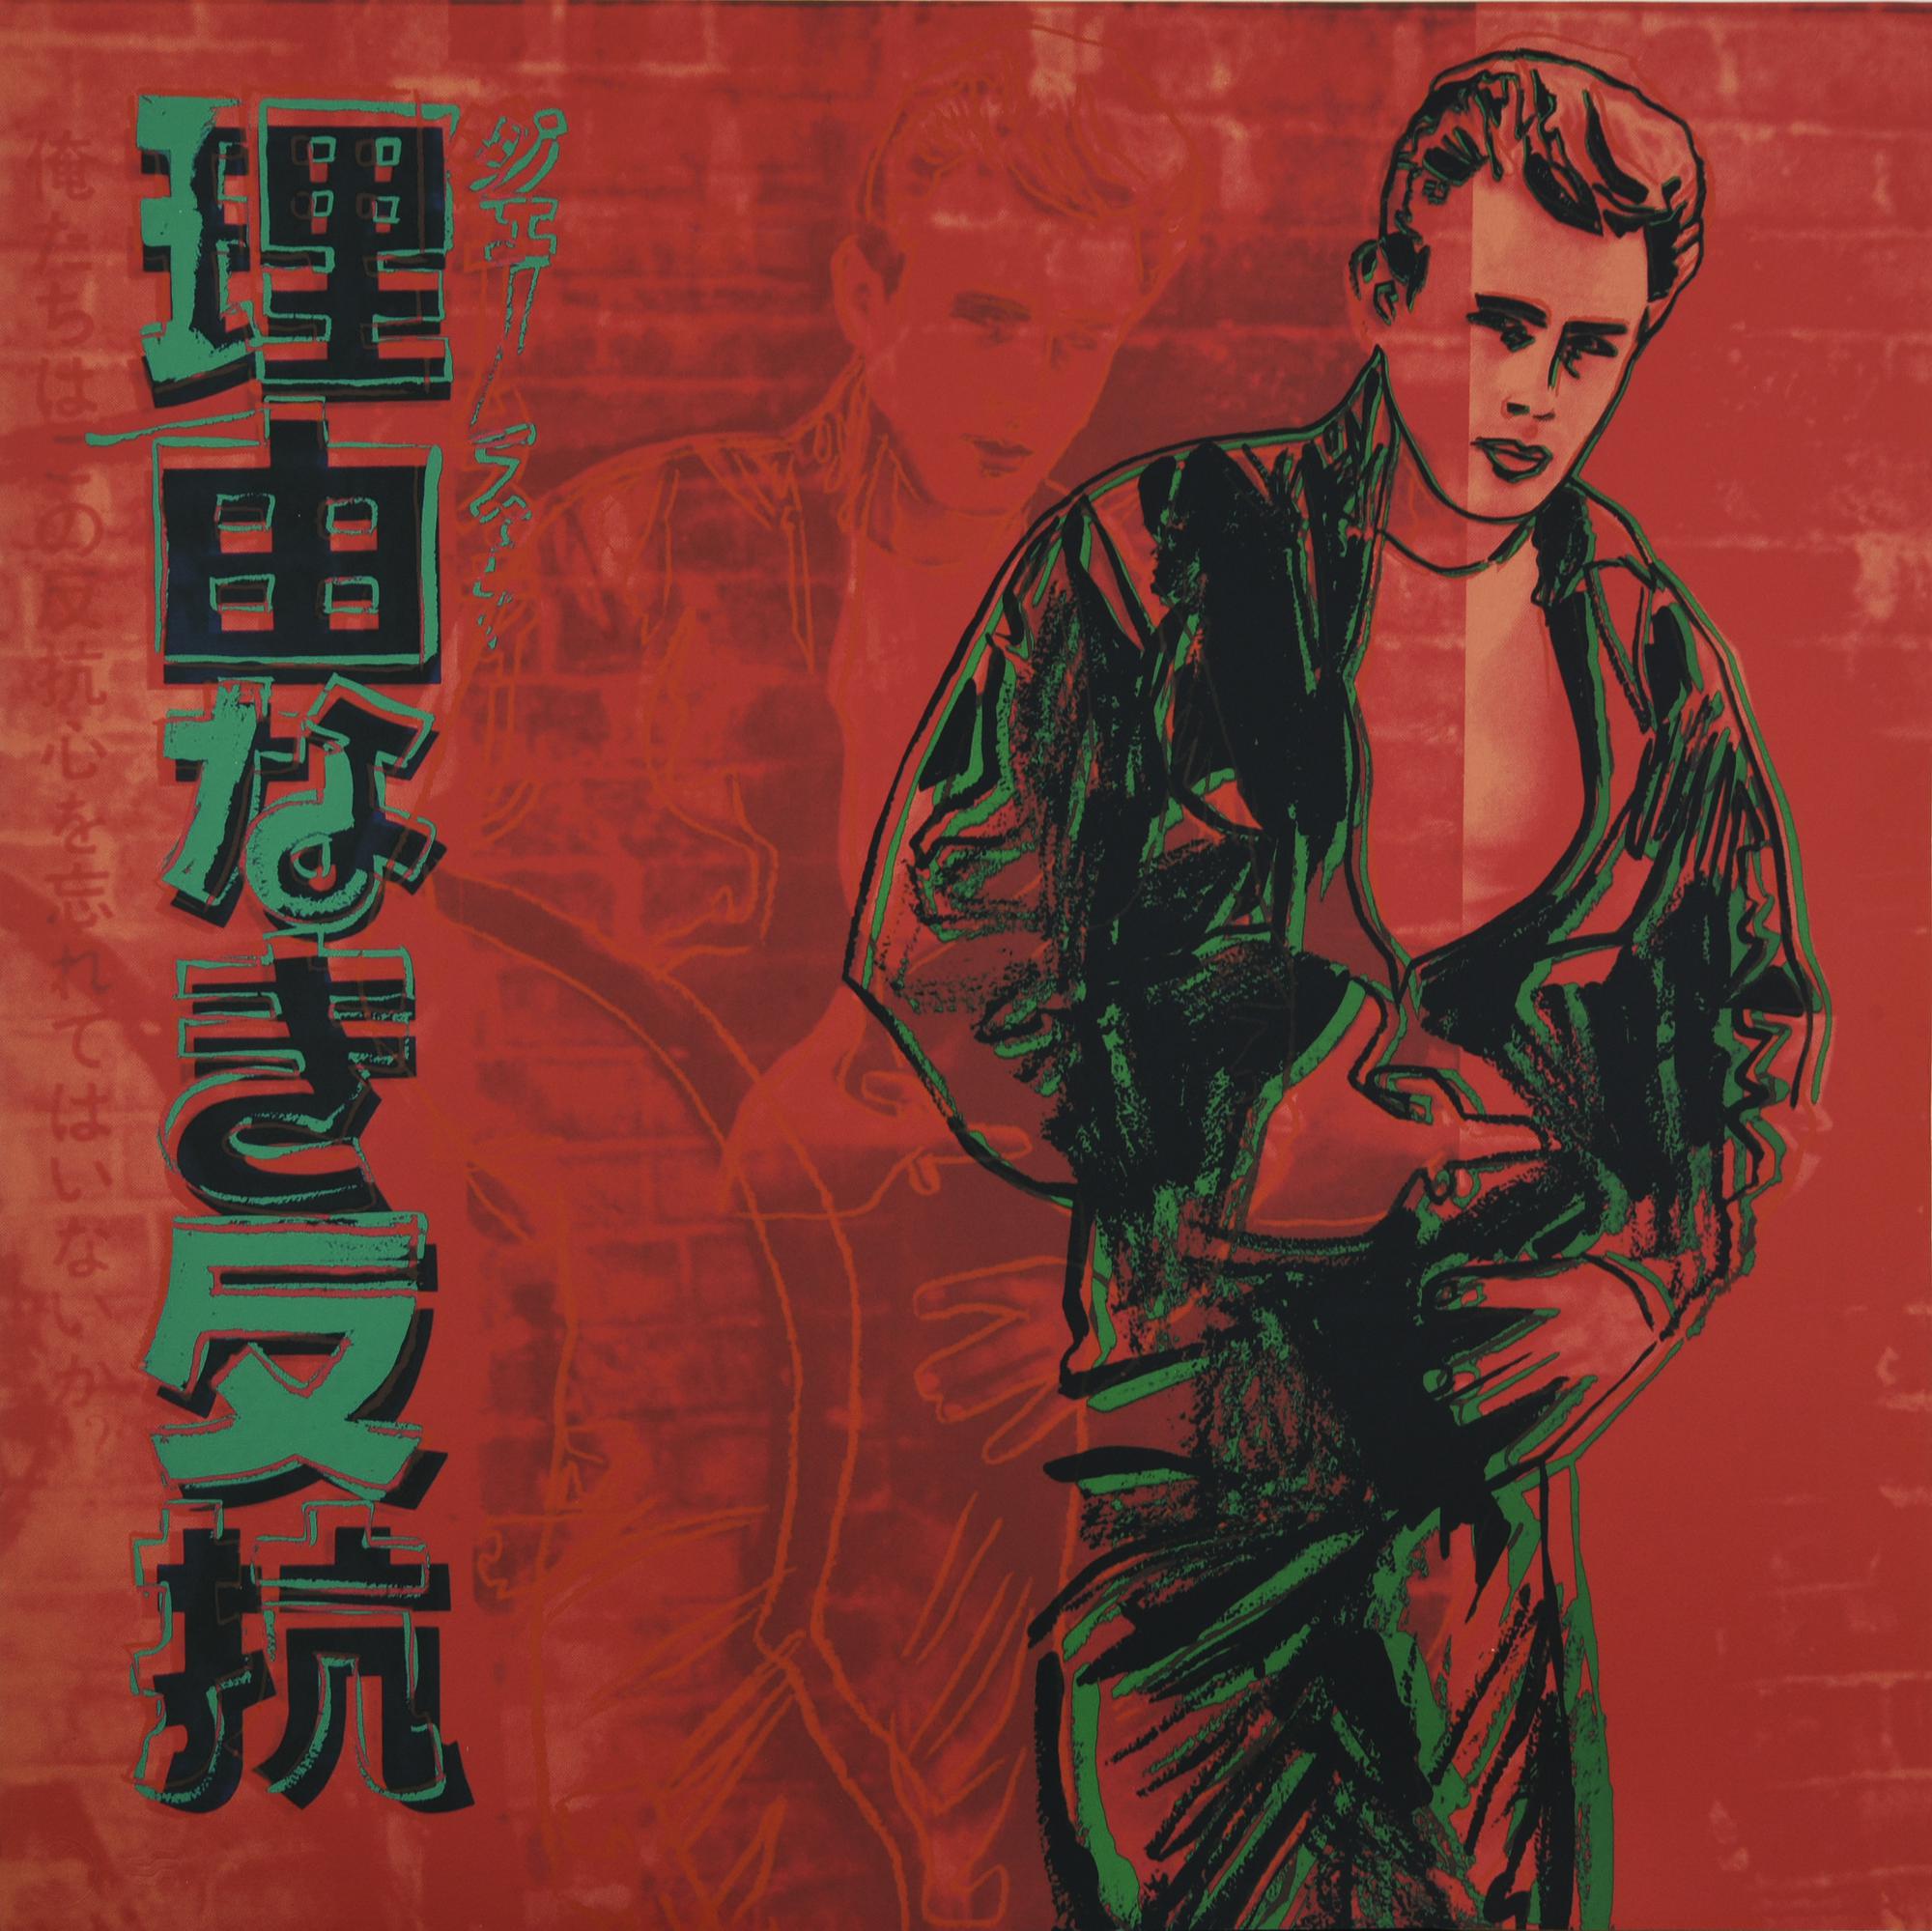 Da Andy Warhol REBEL WITHOUT A CAUSE (JAMES DEAN) stampa tipografica su carta...